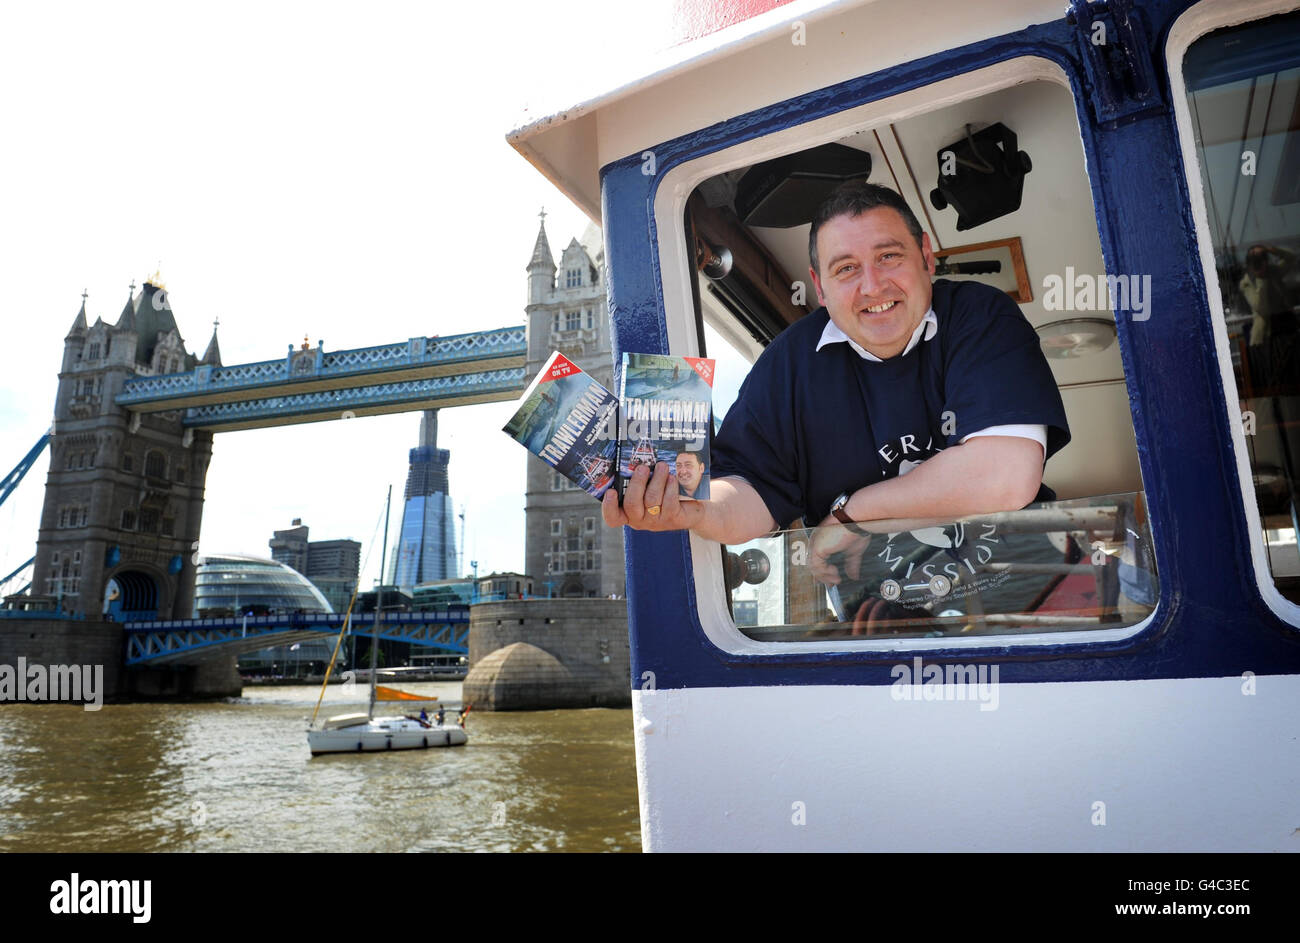 Jimmy Buchan, star of the TV series Trawlerman, on board his North Sea Trawler, Amity II, by Tower Bridge on the River Thames in London, as he marks the publication of 'Trawlerman' - his memoirs of being at the helm of Britain's most dangerous job for over 30 years. Stock Photo